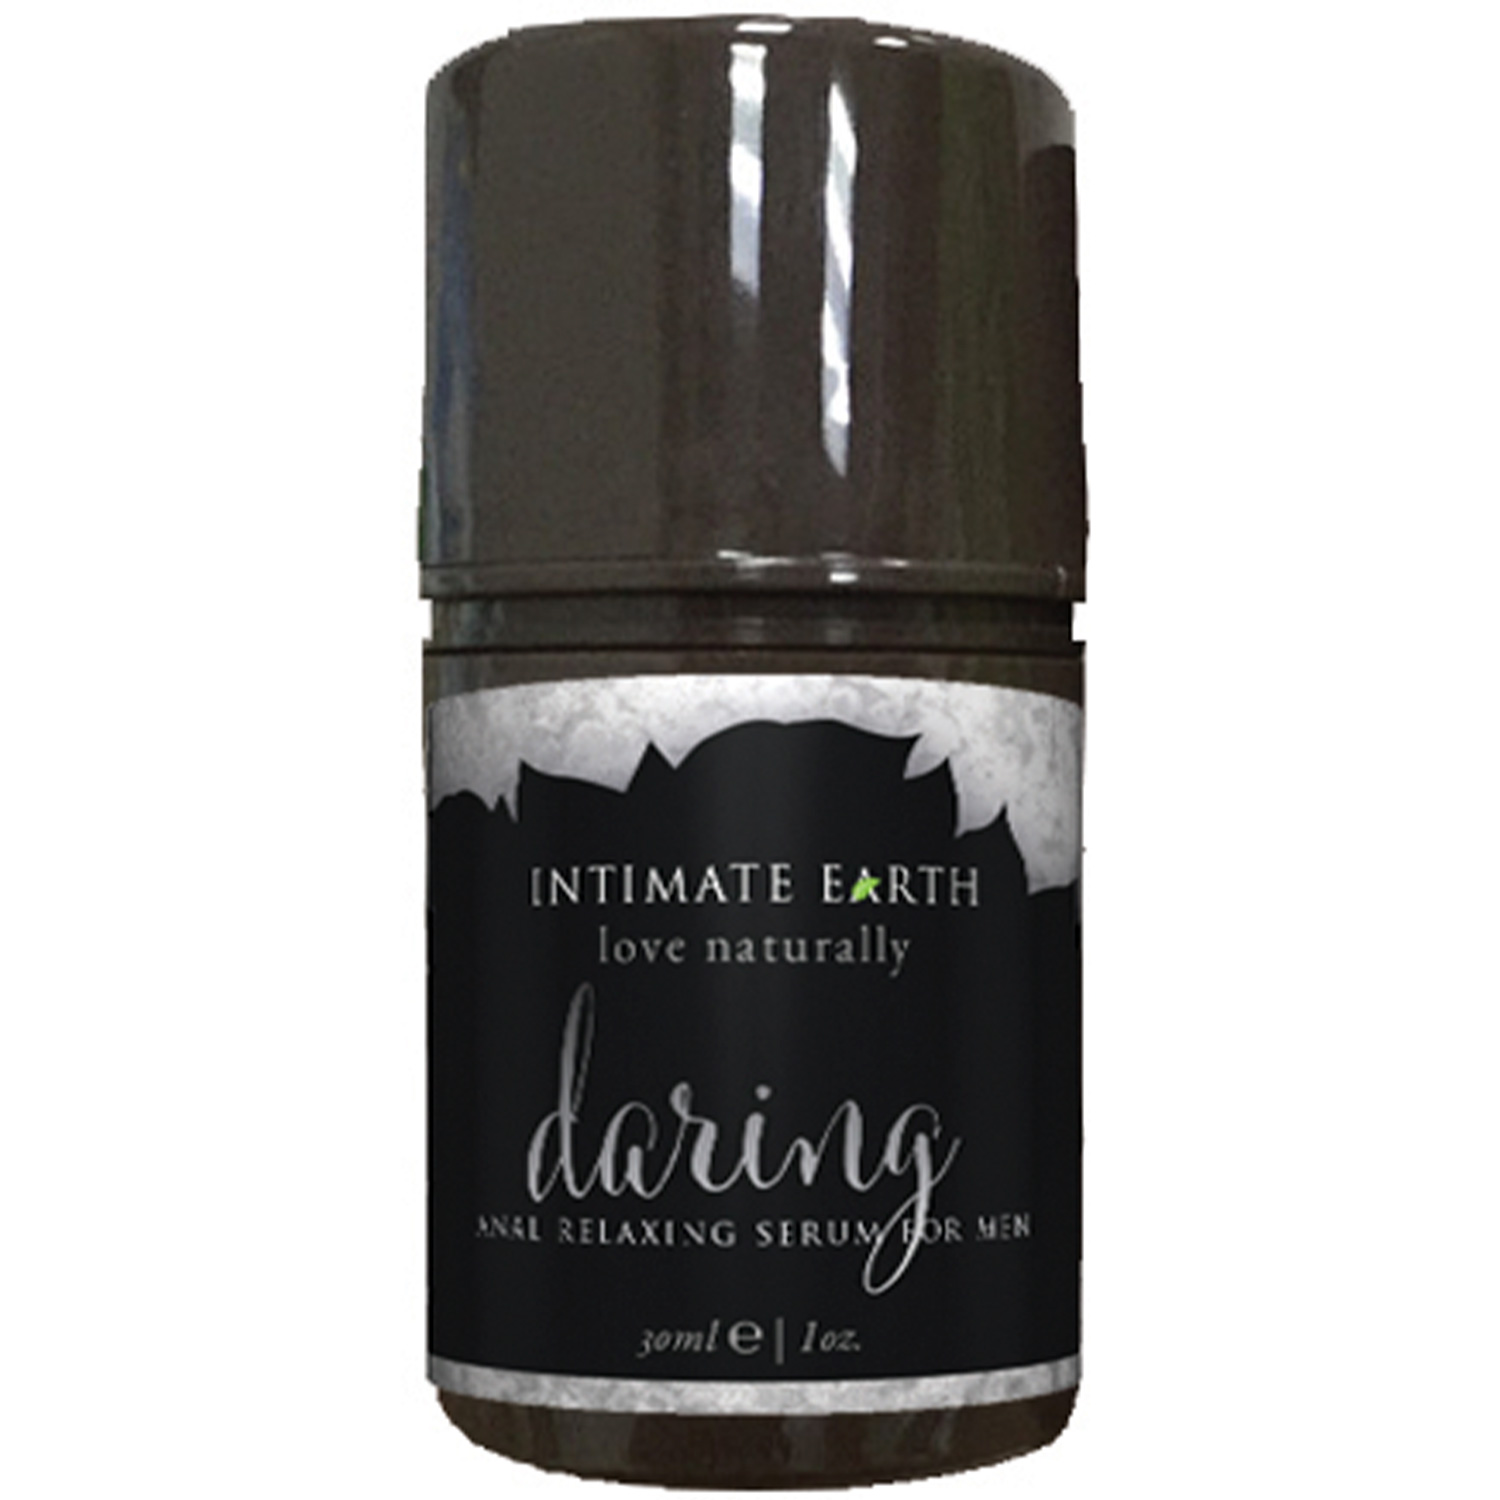 Intimate Earth Daring Anal Relaxing Serum Mand 30 ml - Clear